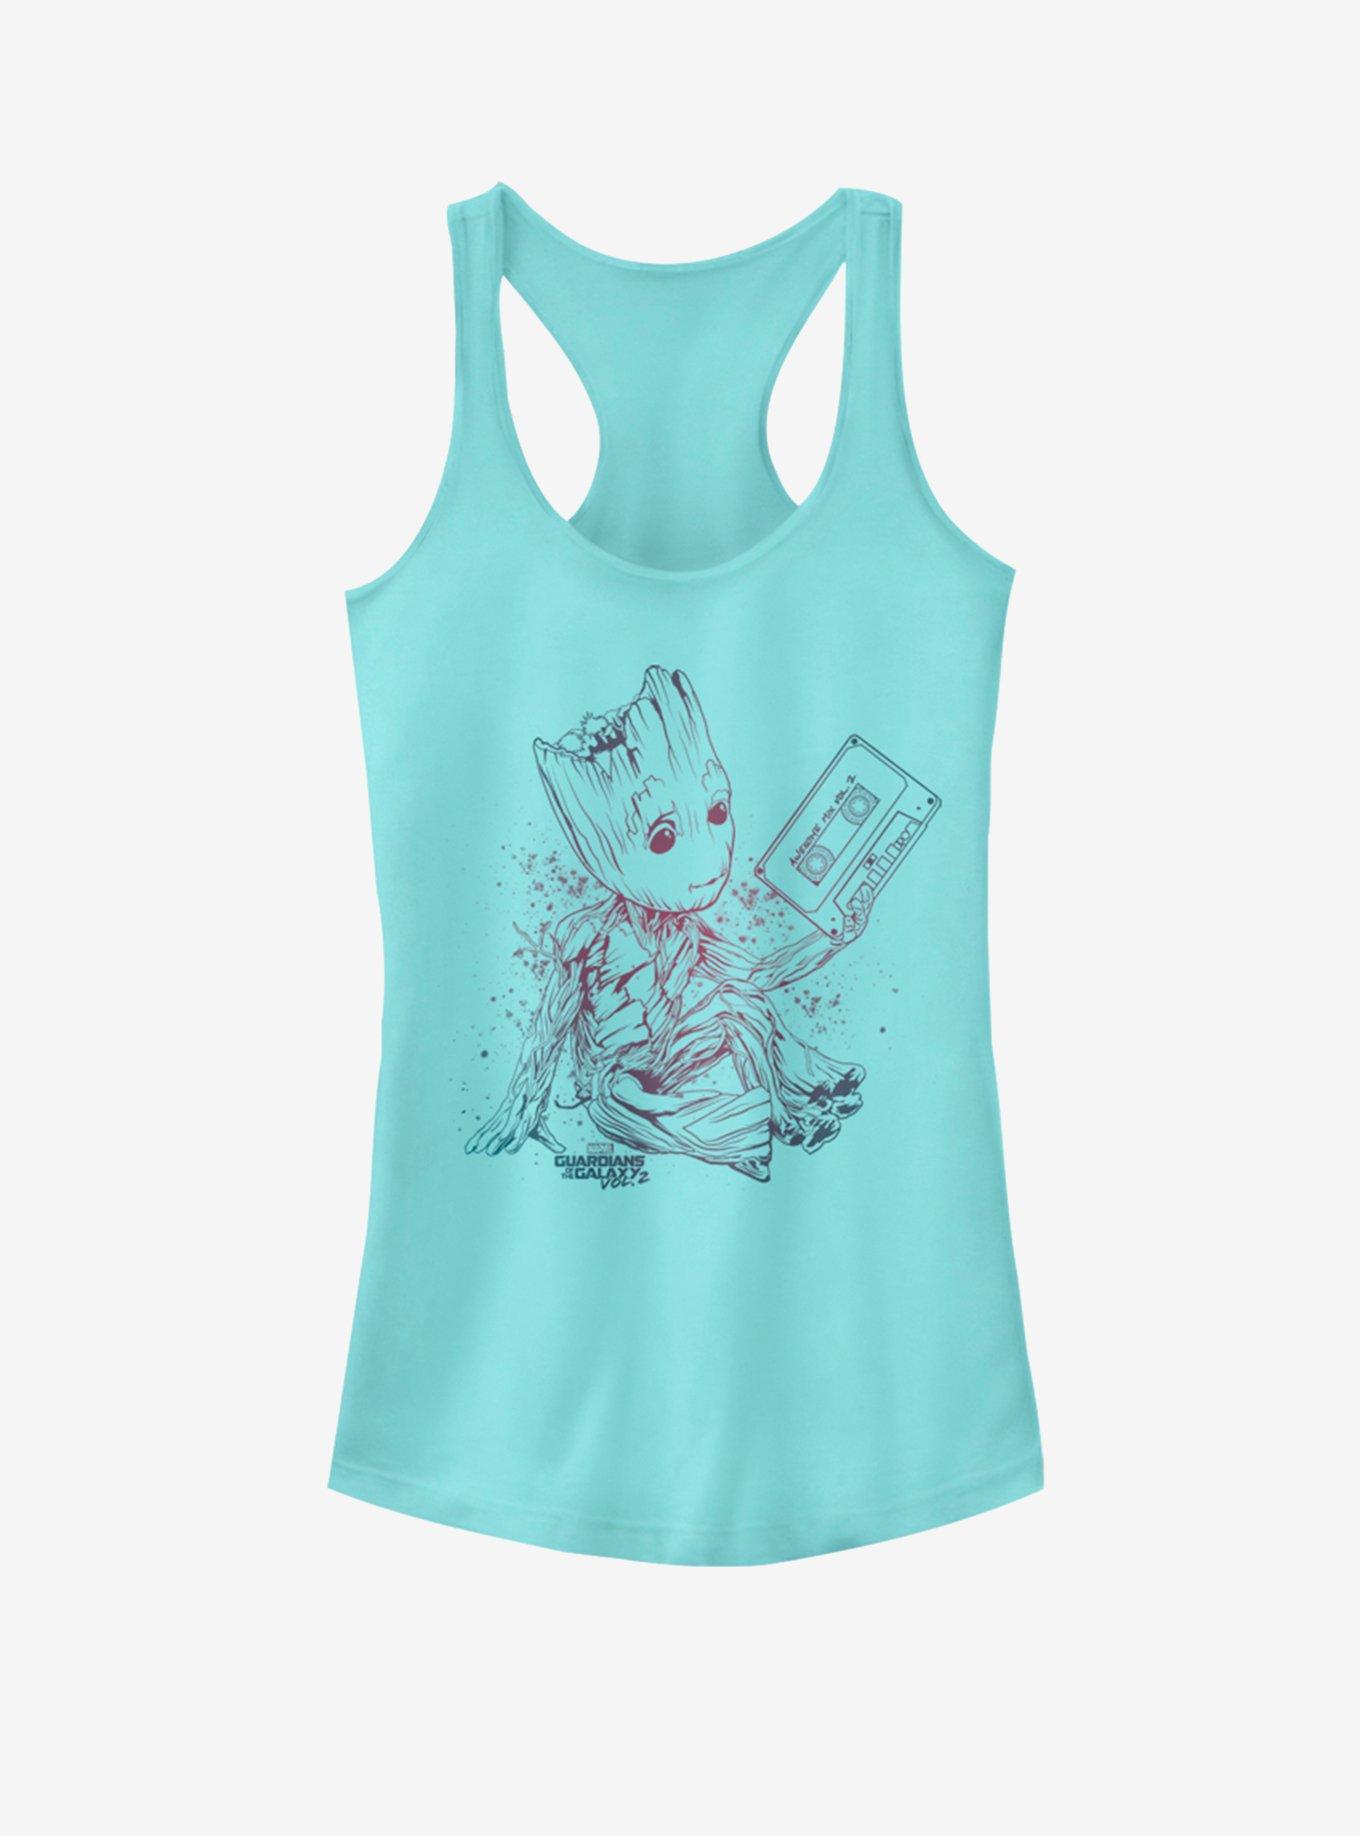 Marvel Guardians of the Galaxy Grootient Girls Tank, CANCUN, hi-res